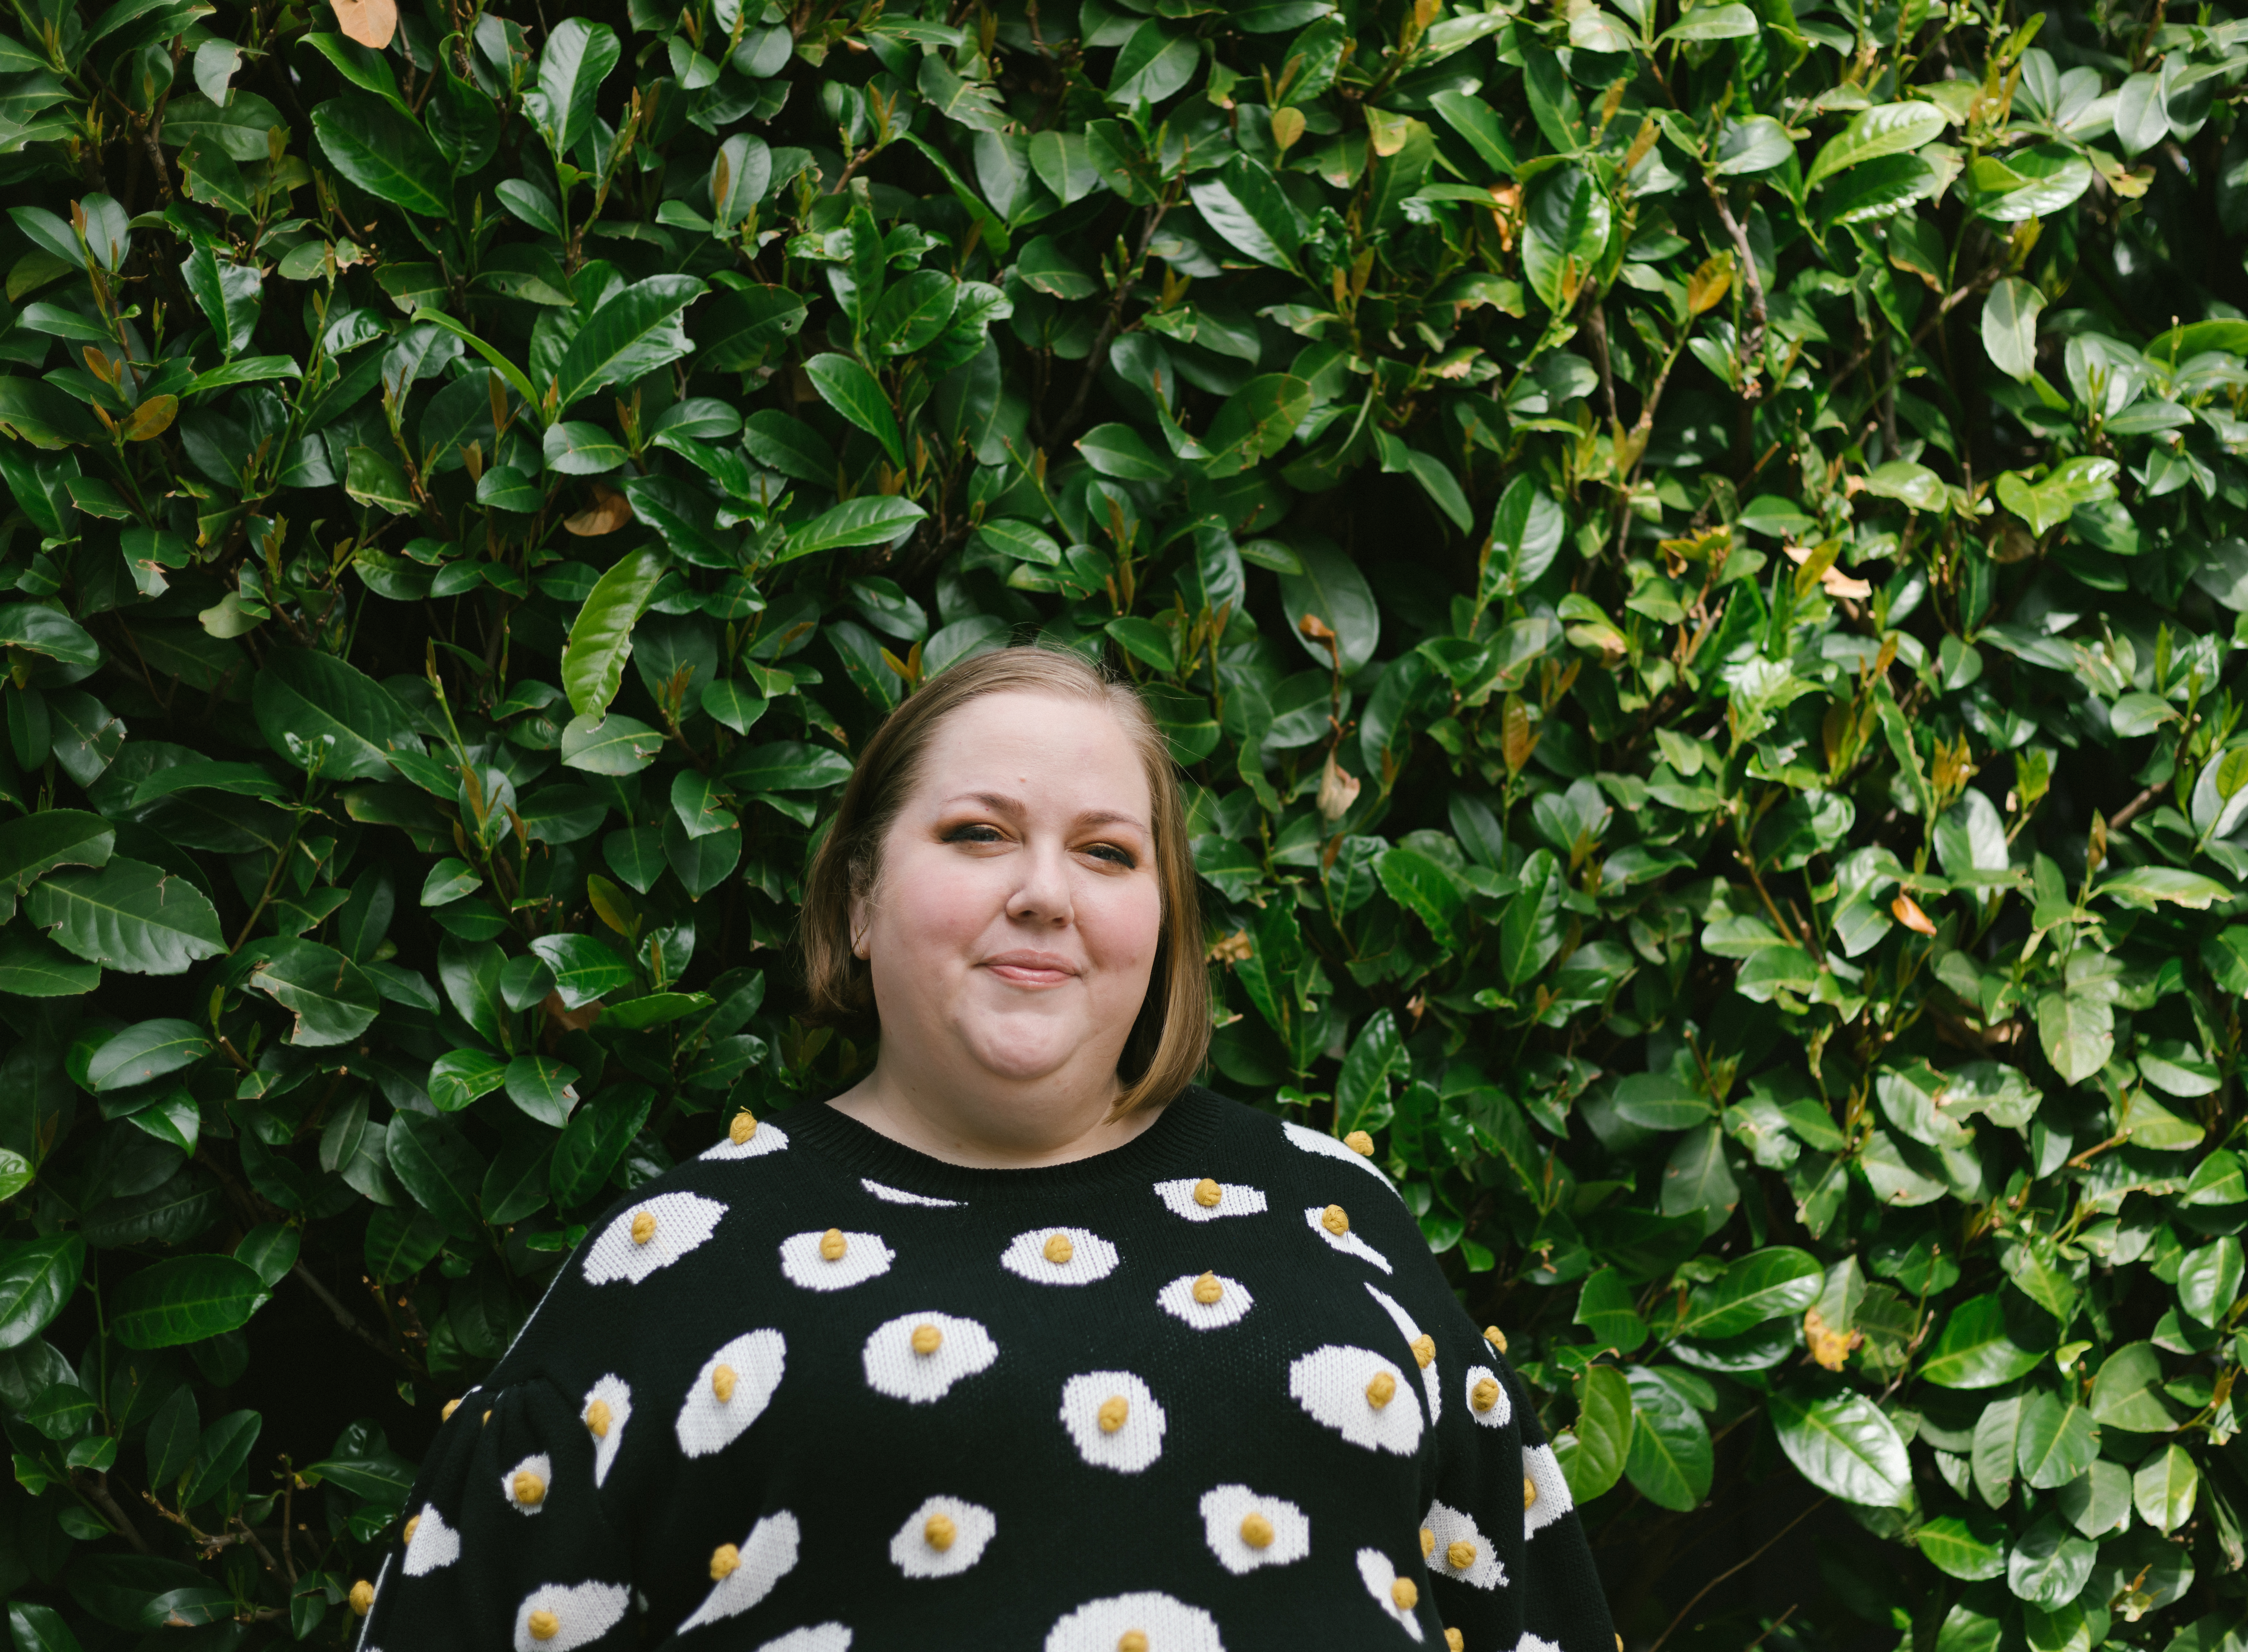 Podcaster and writer Aubrey Gordon stands in an egg sweater in front of a green hedge.